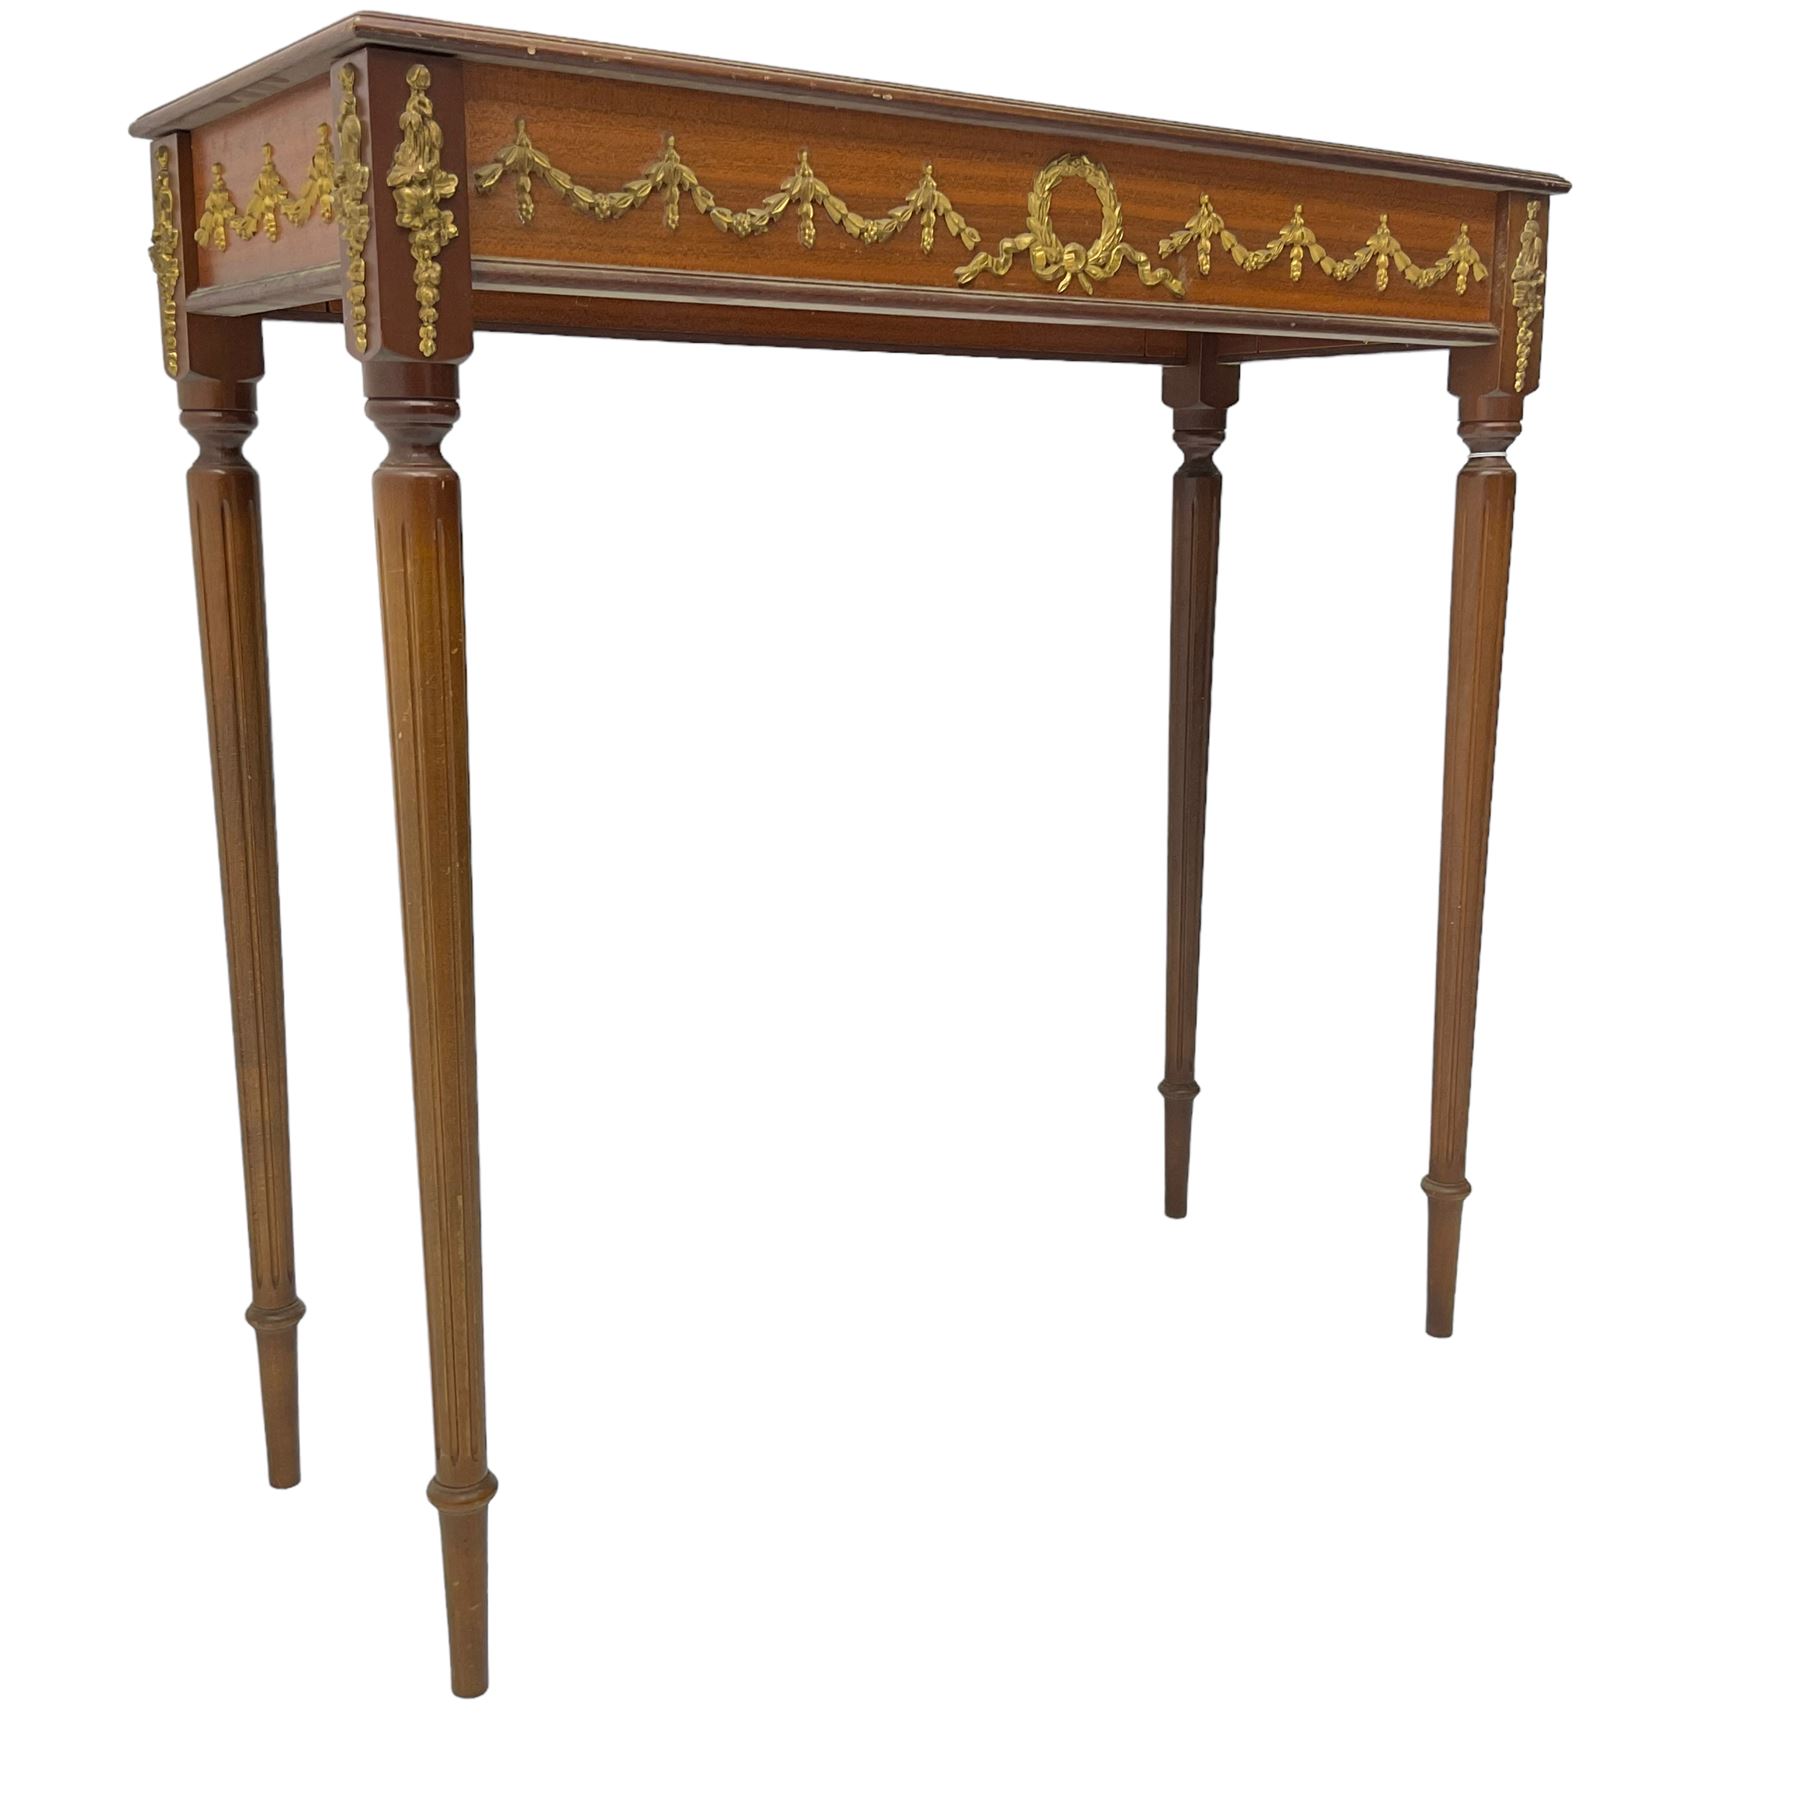 Early 20th century mahogany side table - Image 4 of 7